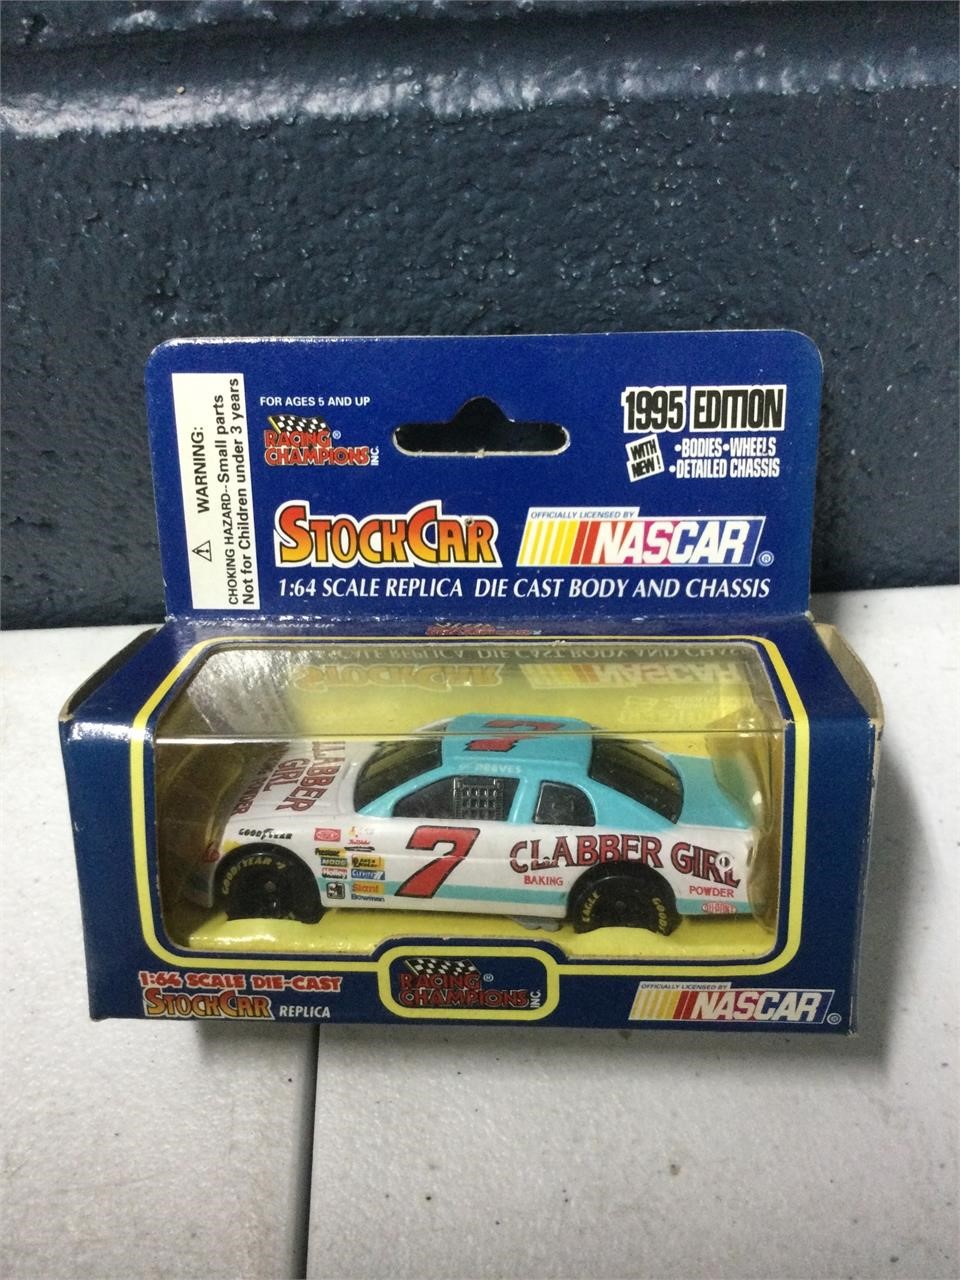 1:64 scale